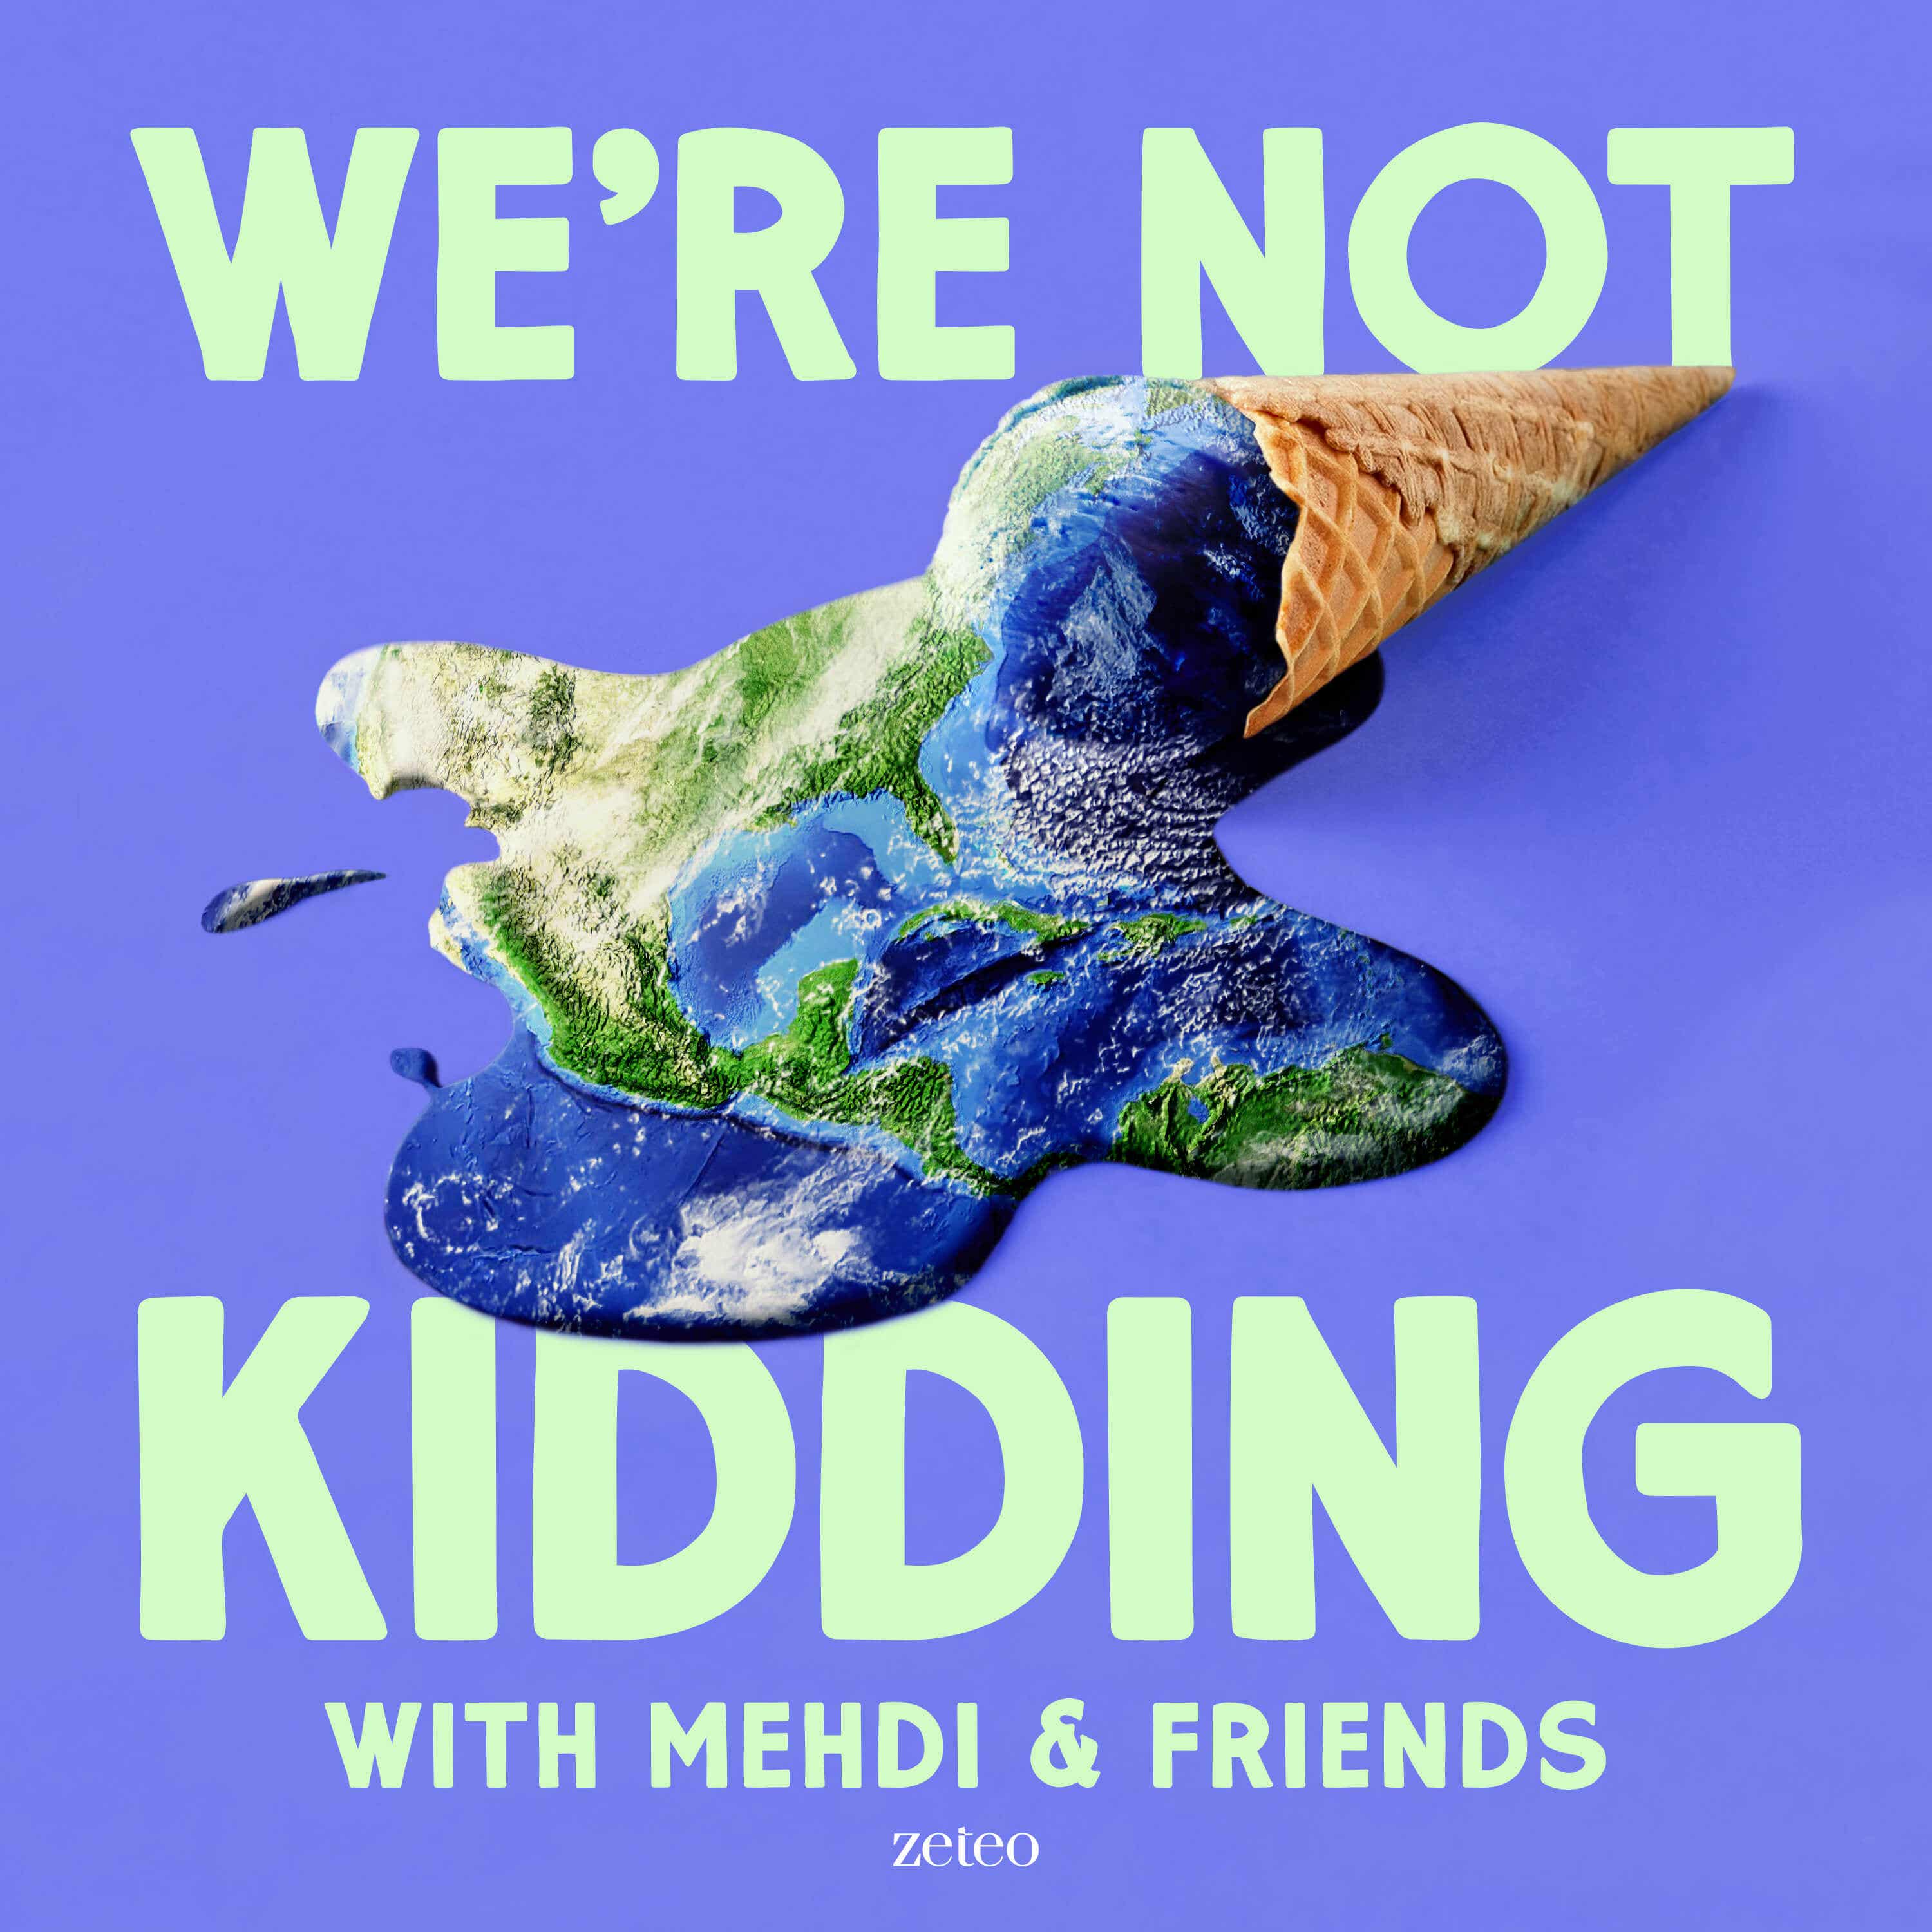 We’re Not Kidding with Mehdi & Friends podcast show image